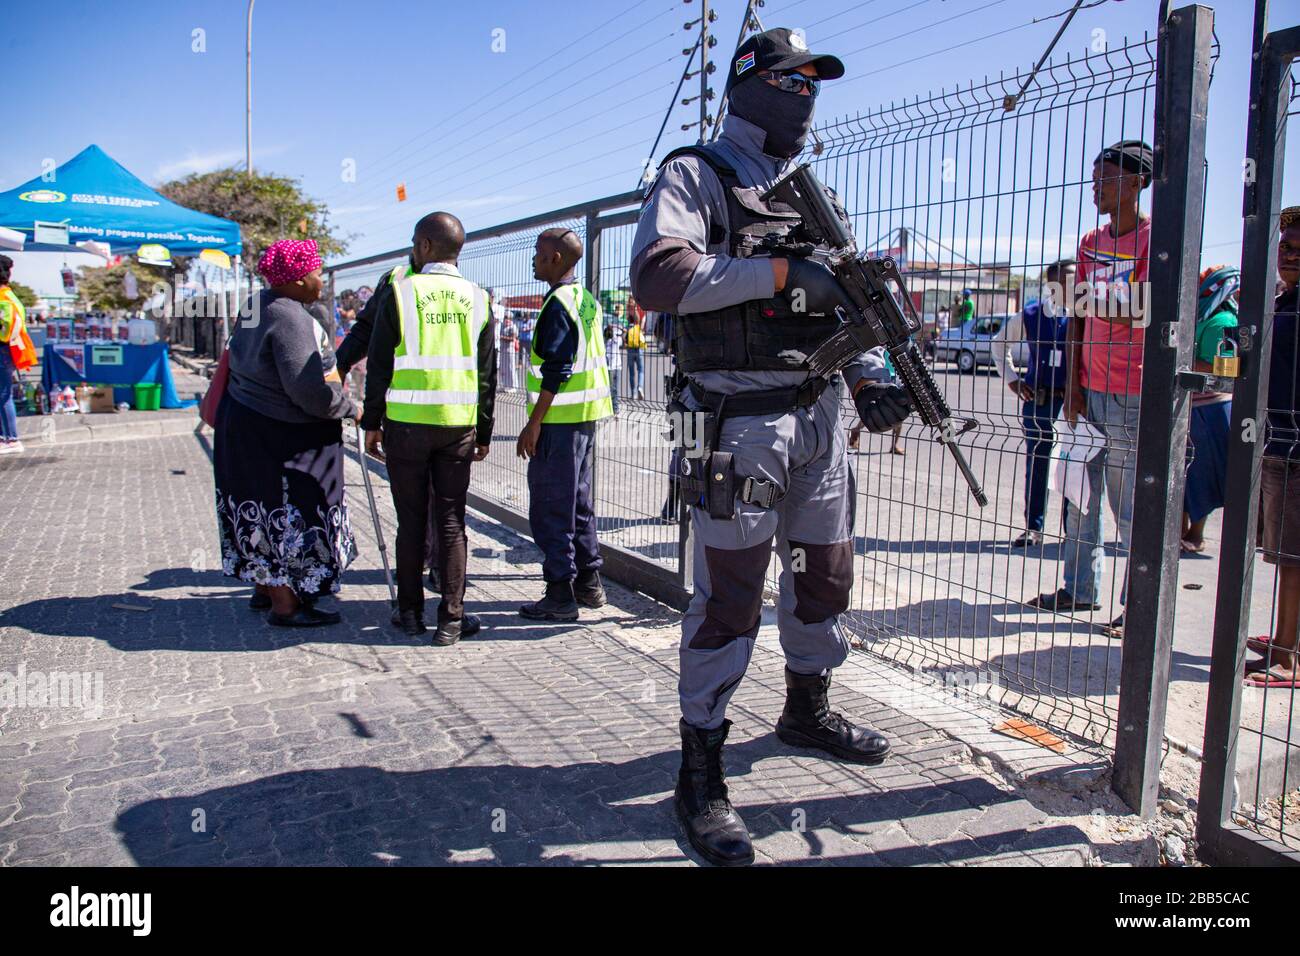 Cape Town, South Africa. 30th Mar, 2020. a member of TSU Protection Services stands guard at a SASSA paypoint inside a shopping centre in Makhaza, Khayelitsha, after the South African government declared a 21 day COVID-19 lockdown as part of the State of National Disaster declaration by President Cyril Ramaphosa. The Health Ministry has asked residents to observe the regulations, practise hygiene, stay at home and practise social distancing. Credit: Roger Sedres/Alamy Live News Stock Photo